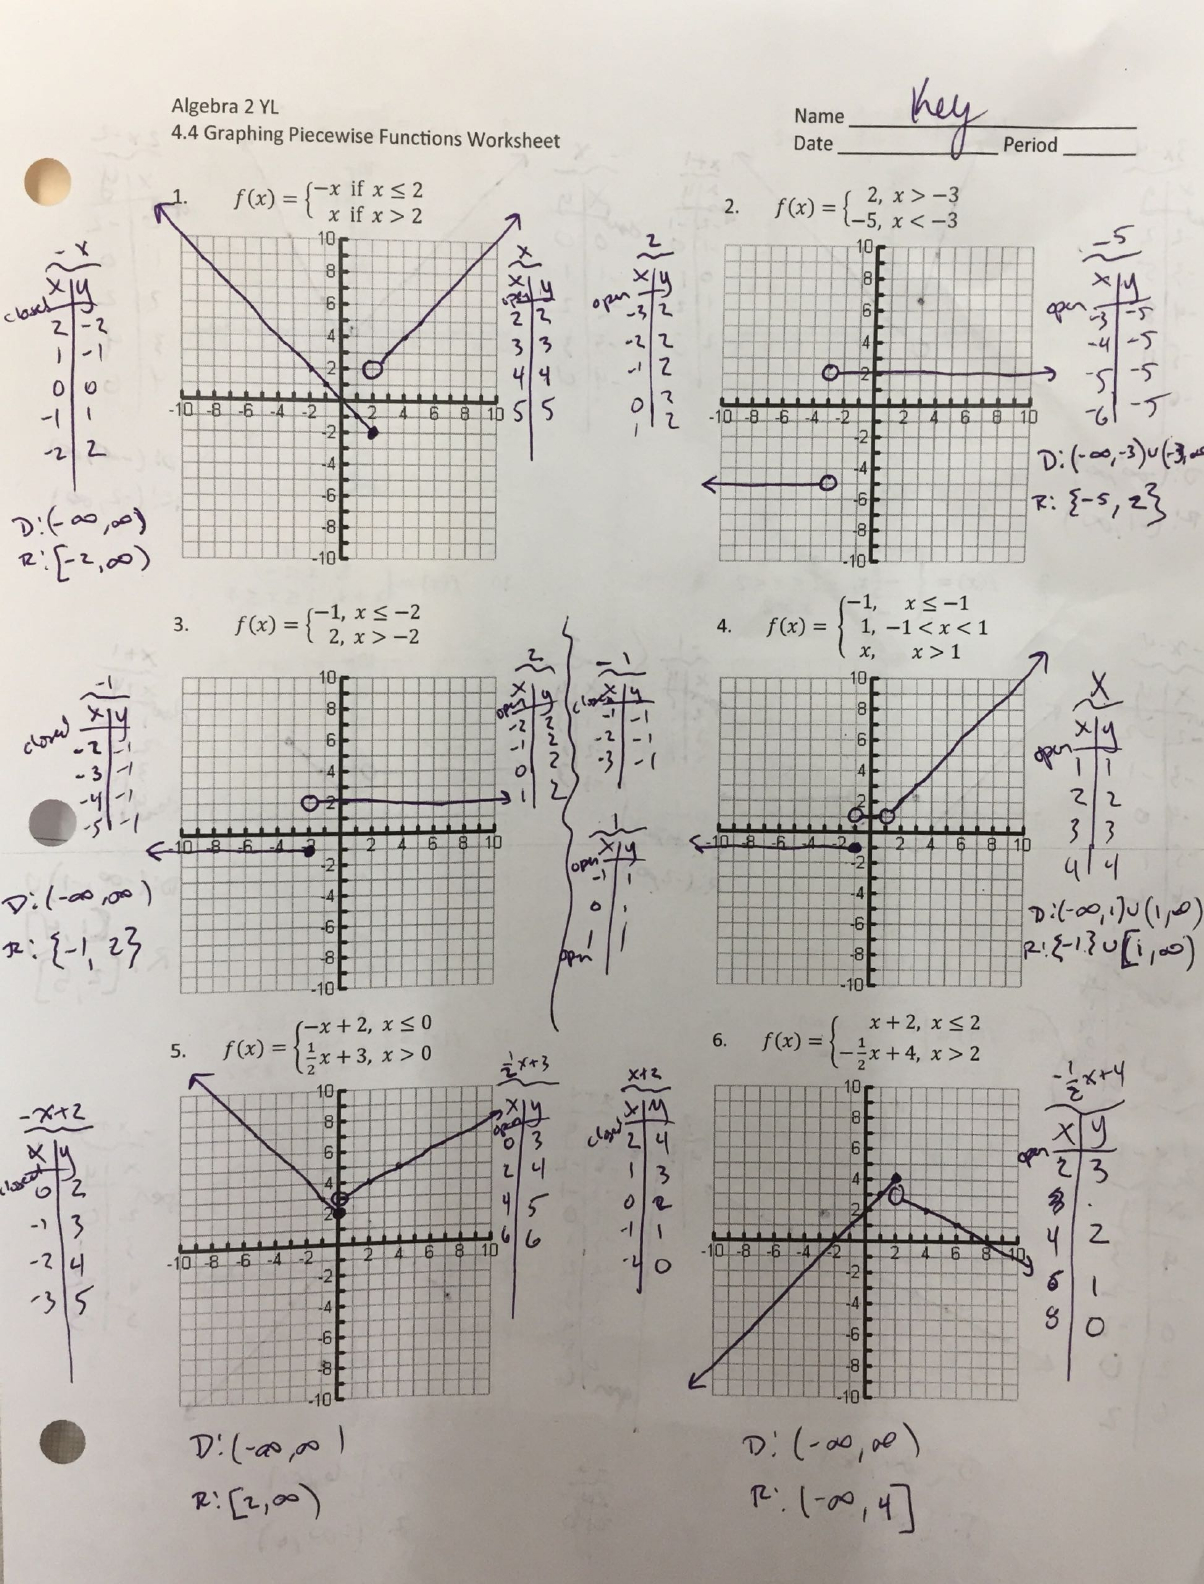 Algebra 2 Yl 44 Graphing Piecewise Functions 2 Yl 44 Graphing Pertaining To Piecewise Functions Worksheet 2